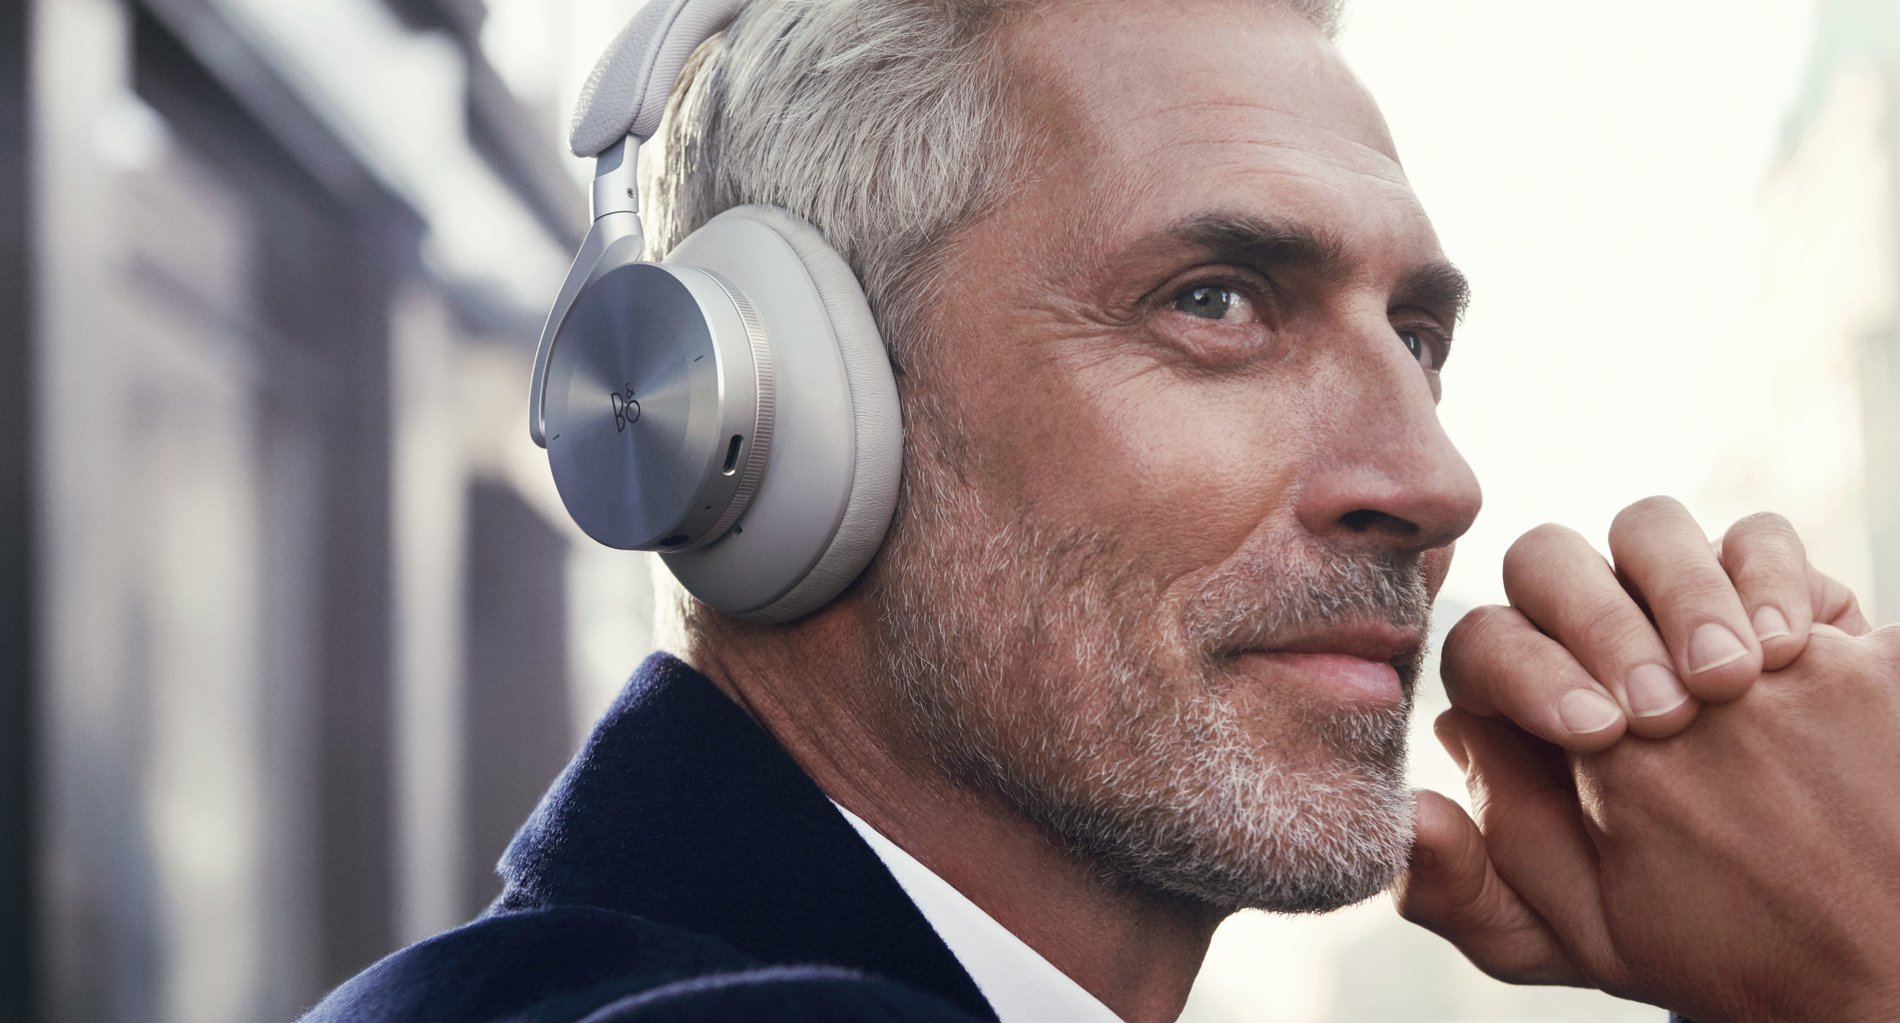 Beoplay H95 Auriculares con ANC adaptable